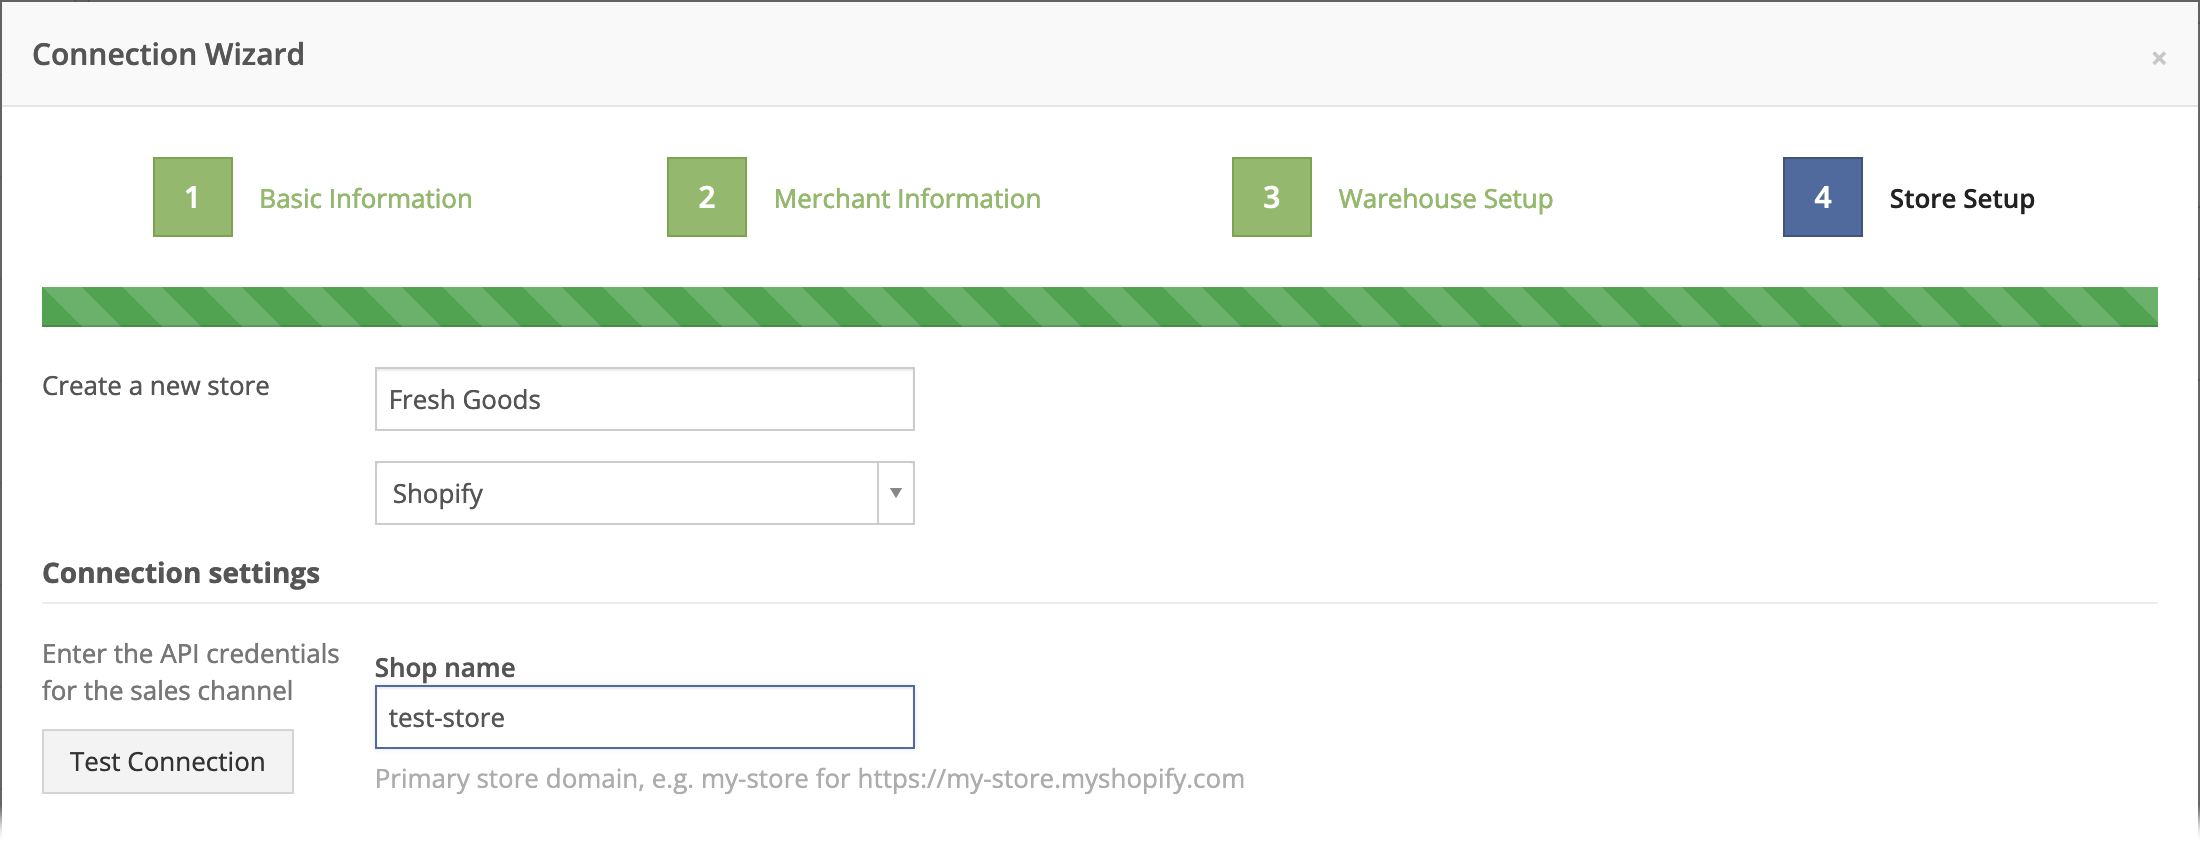 Enter the Shopify store's myshopify.com subdomain as the Shop Name.